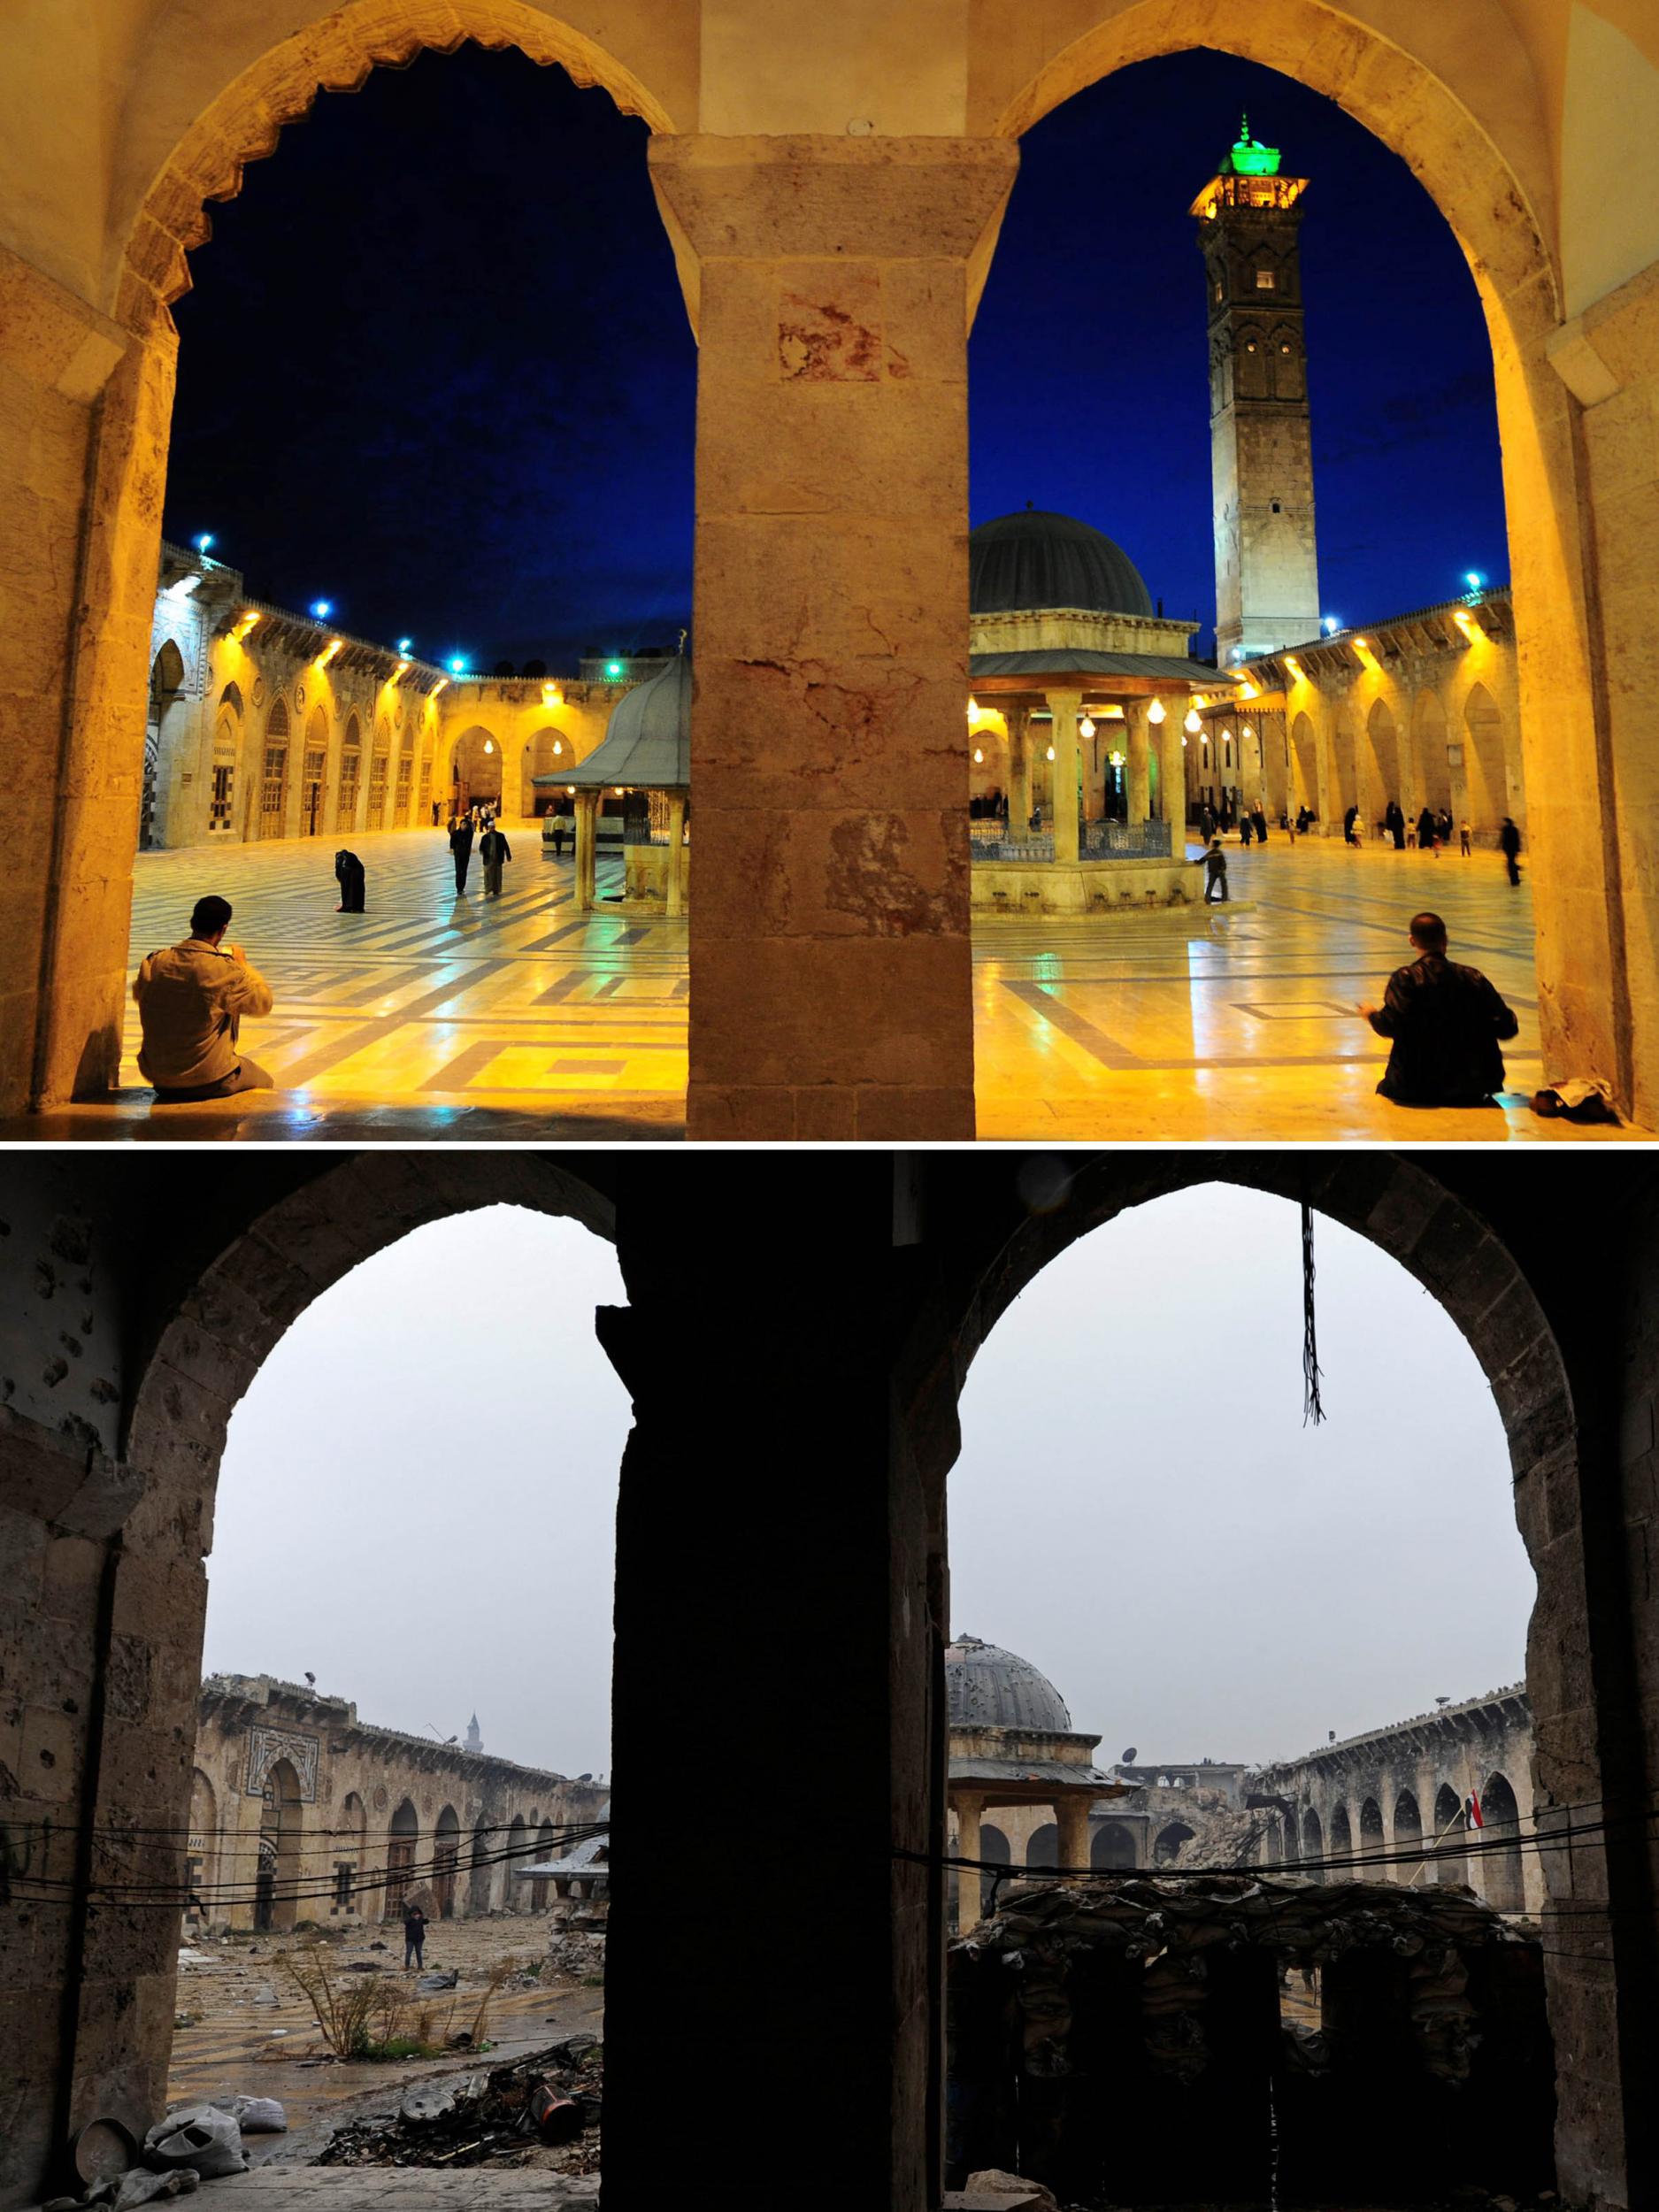 The Umayyad mosque on 12 March 2009, above, and on December 13 2016, below